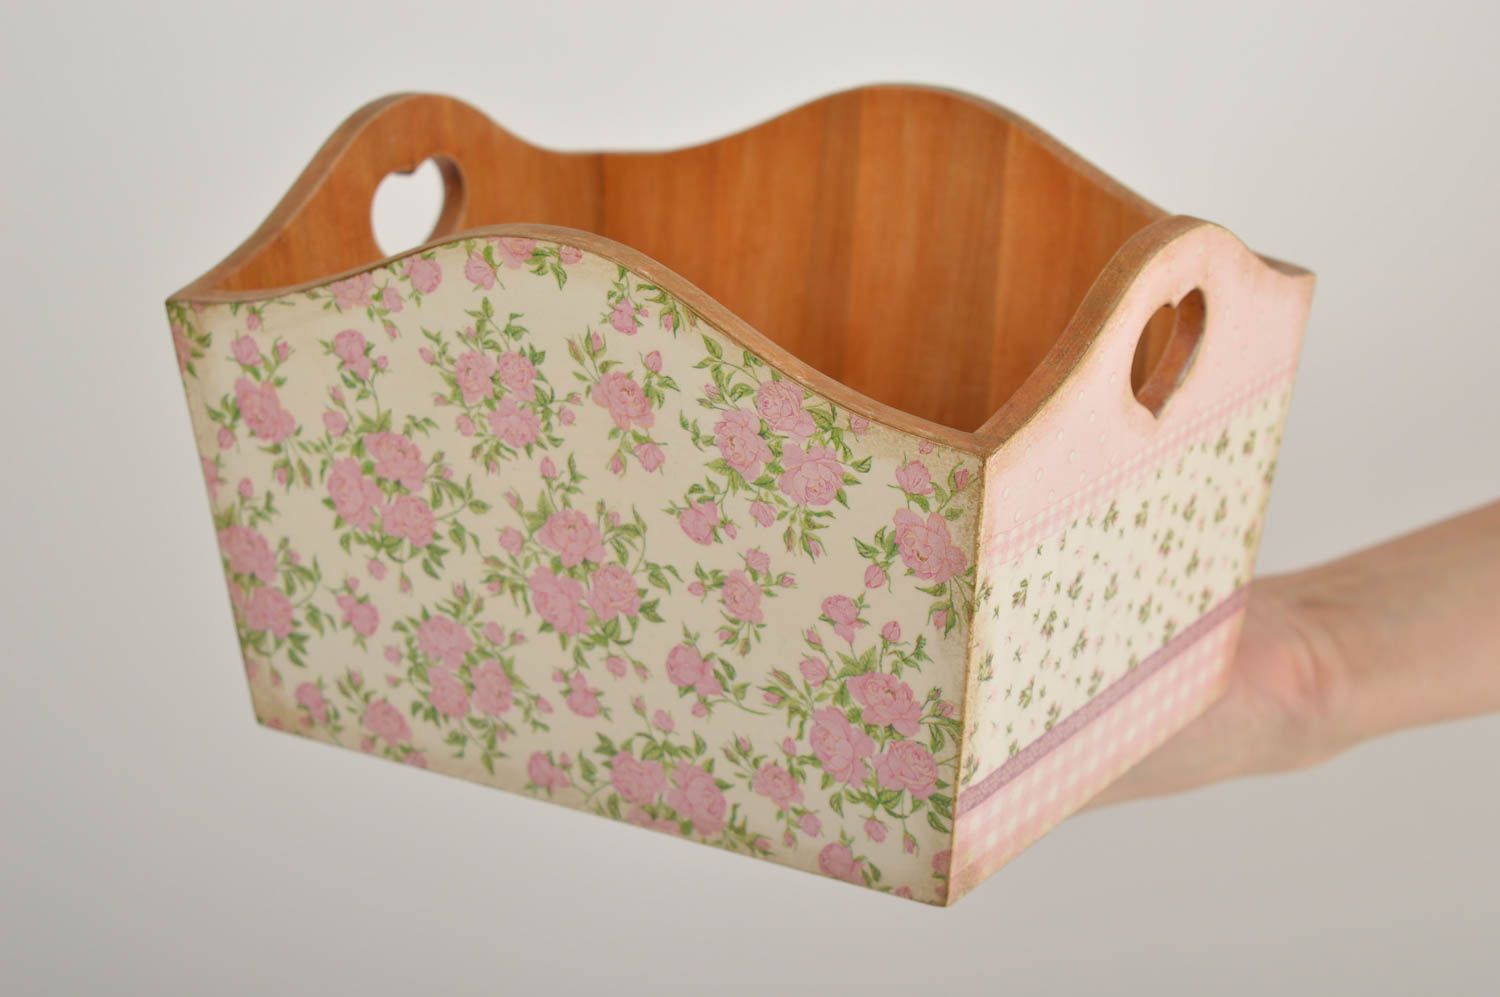 Handmade decorative box for home box for little things home decor ideas photo 5